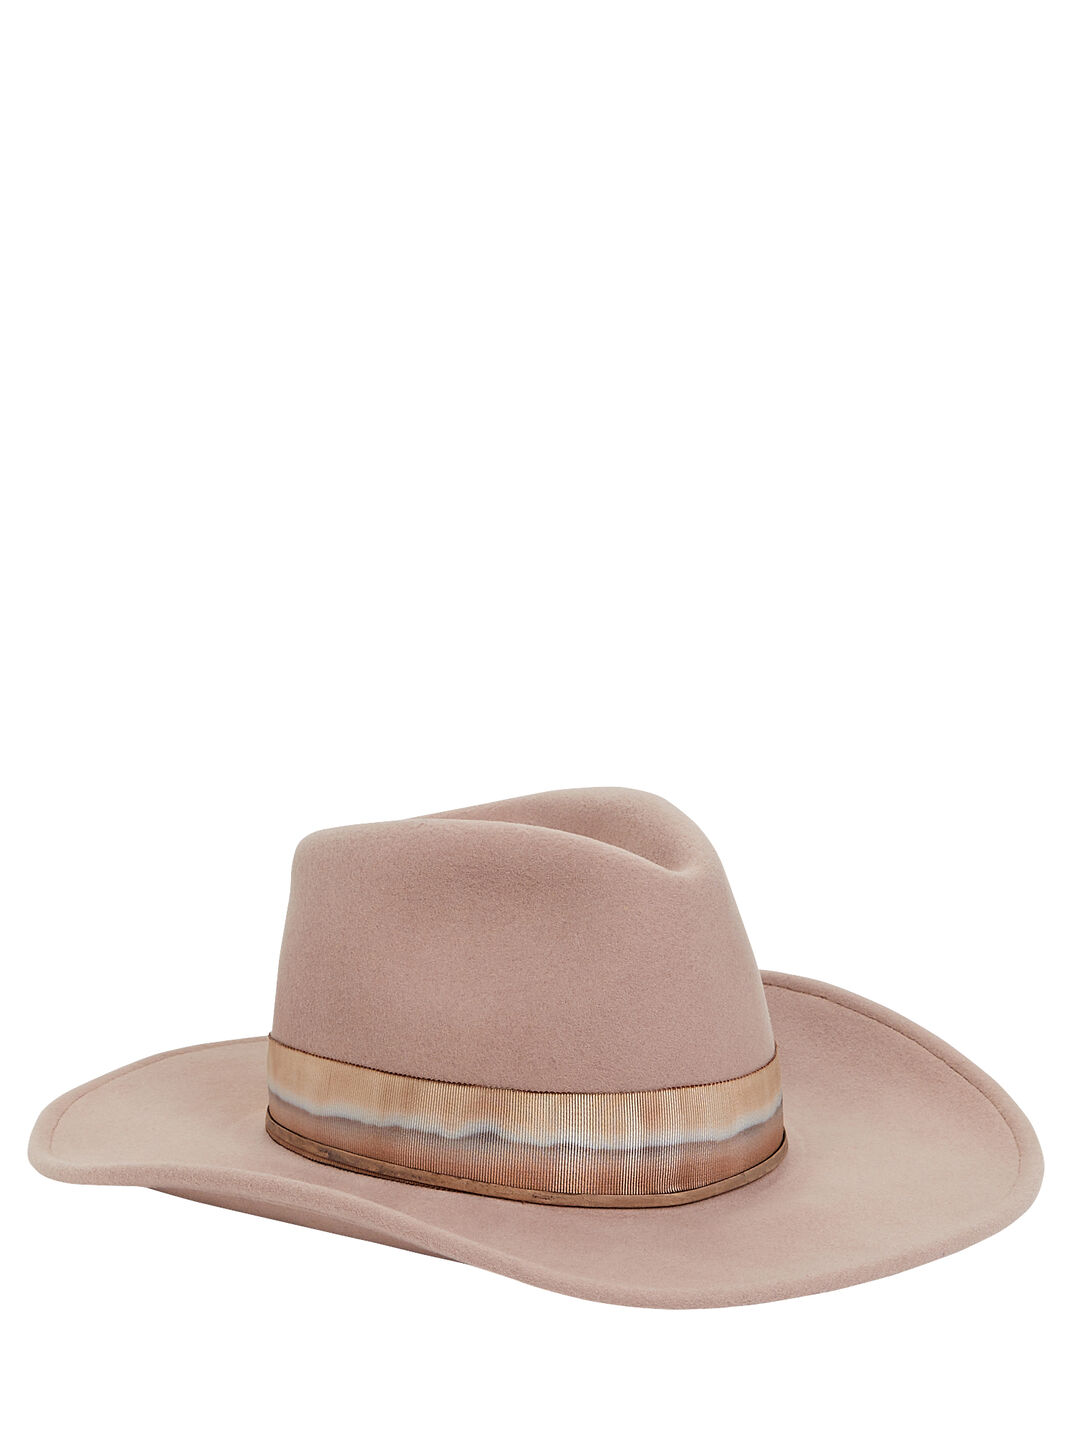 Mallow Suede Fedora